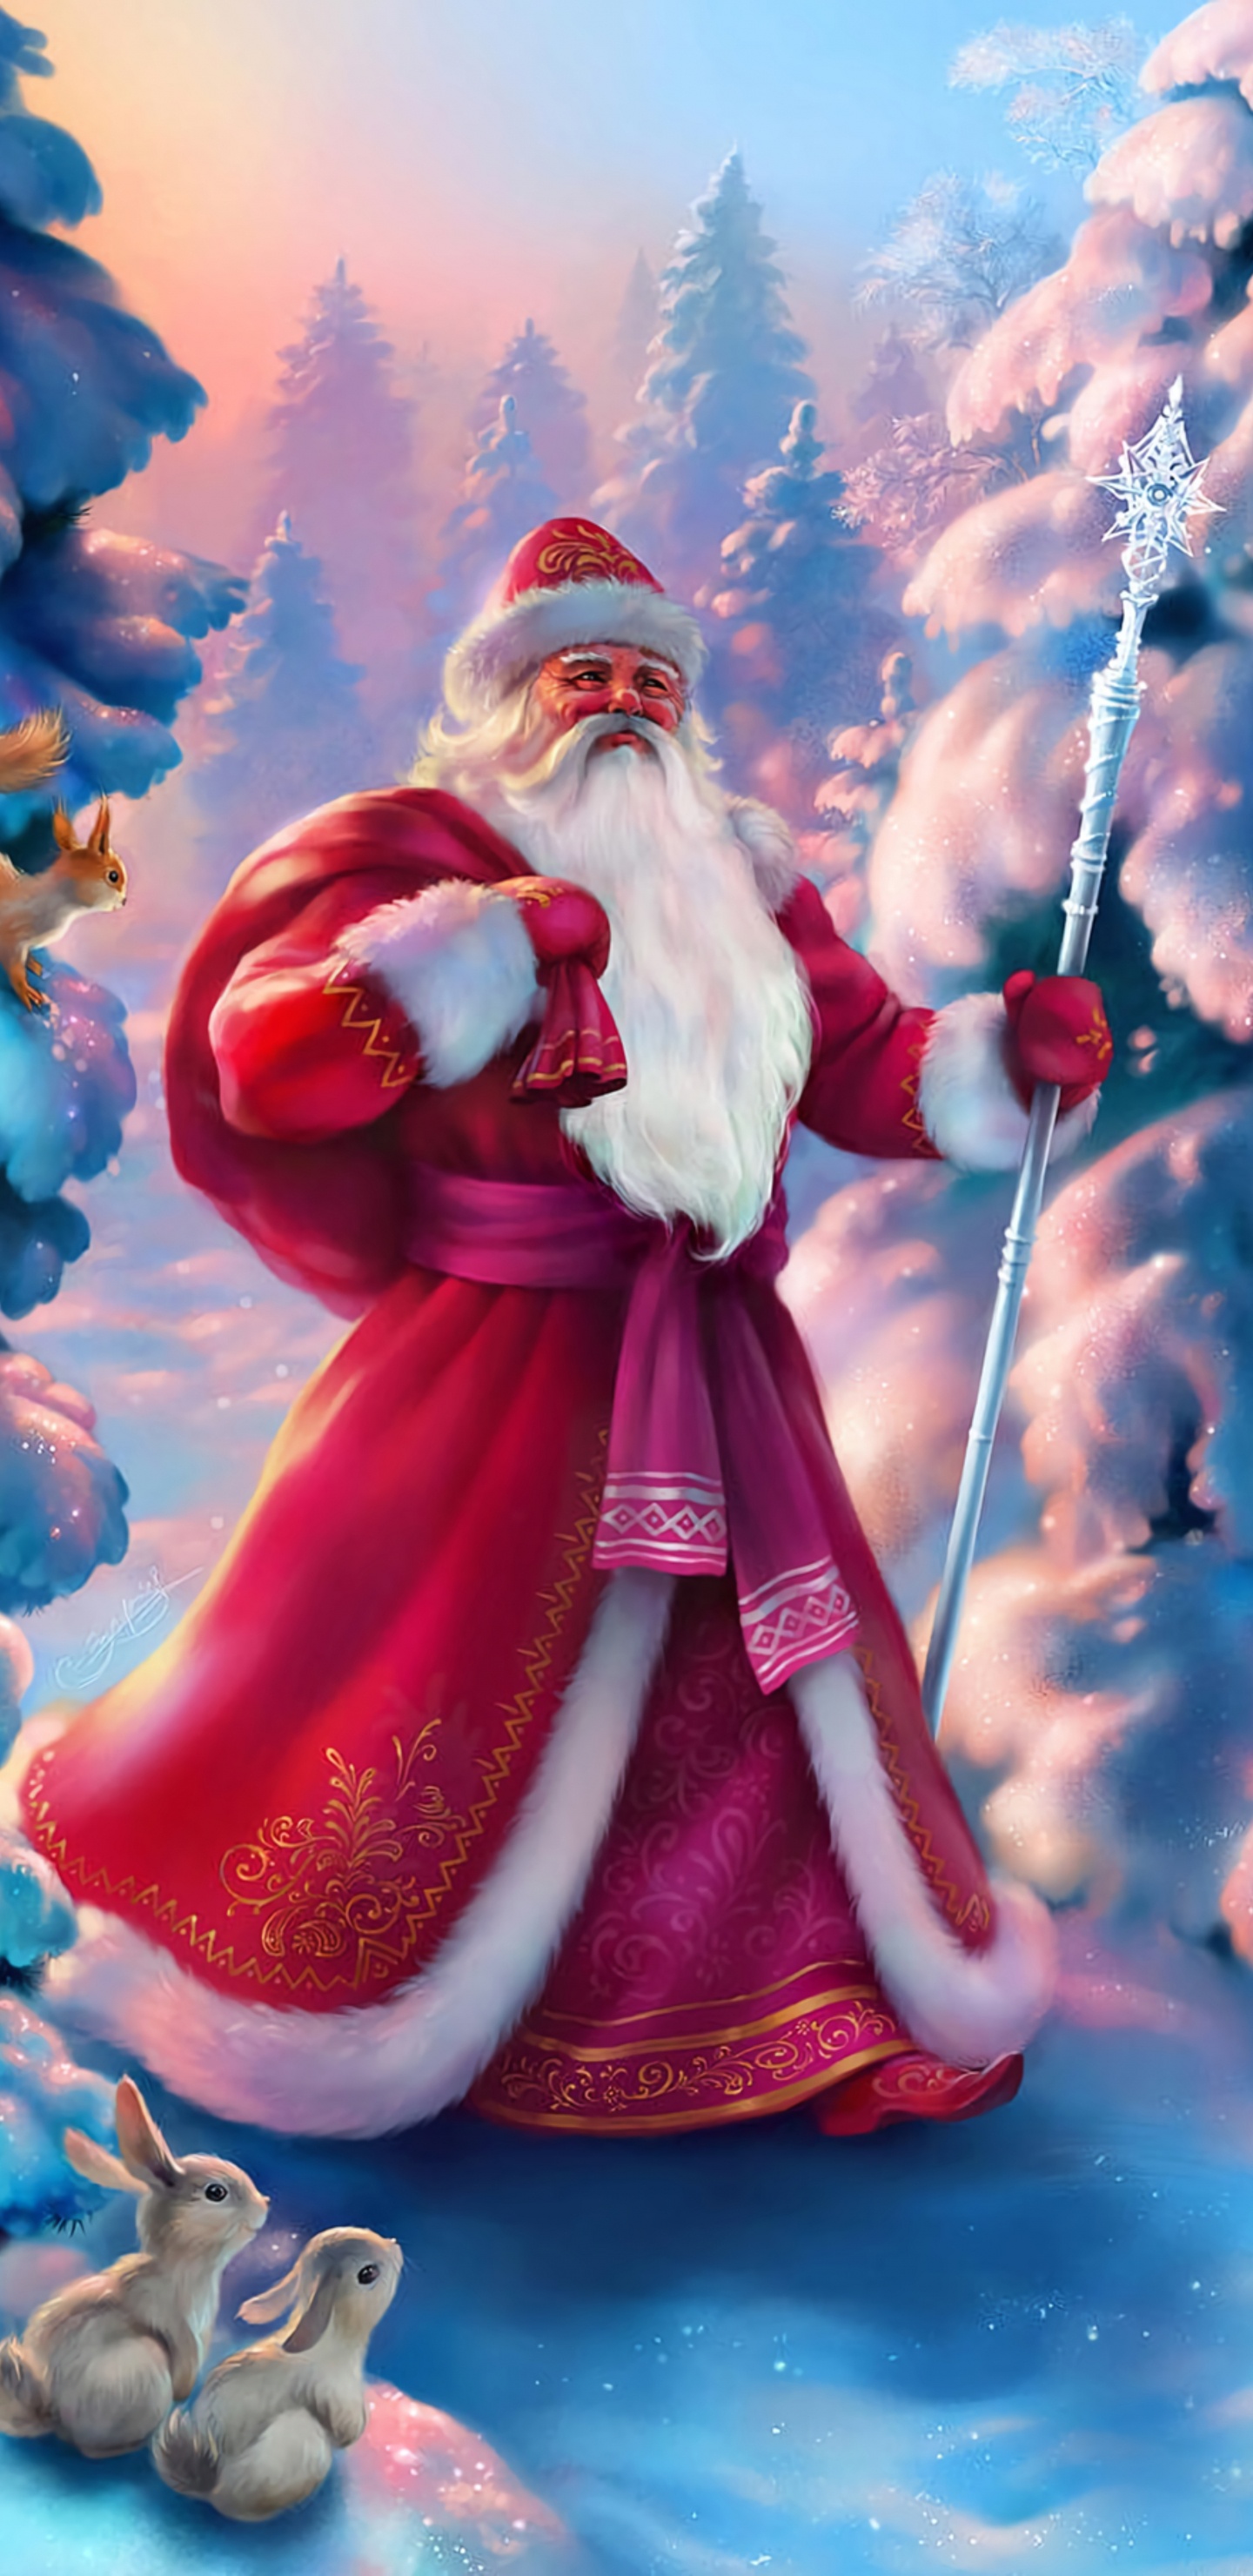 Santa Claus, Ded Moroz, Christmas Day, Christmas, Animation. Wallpaper in 1440x2960 Resolution